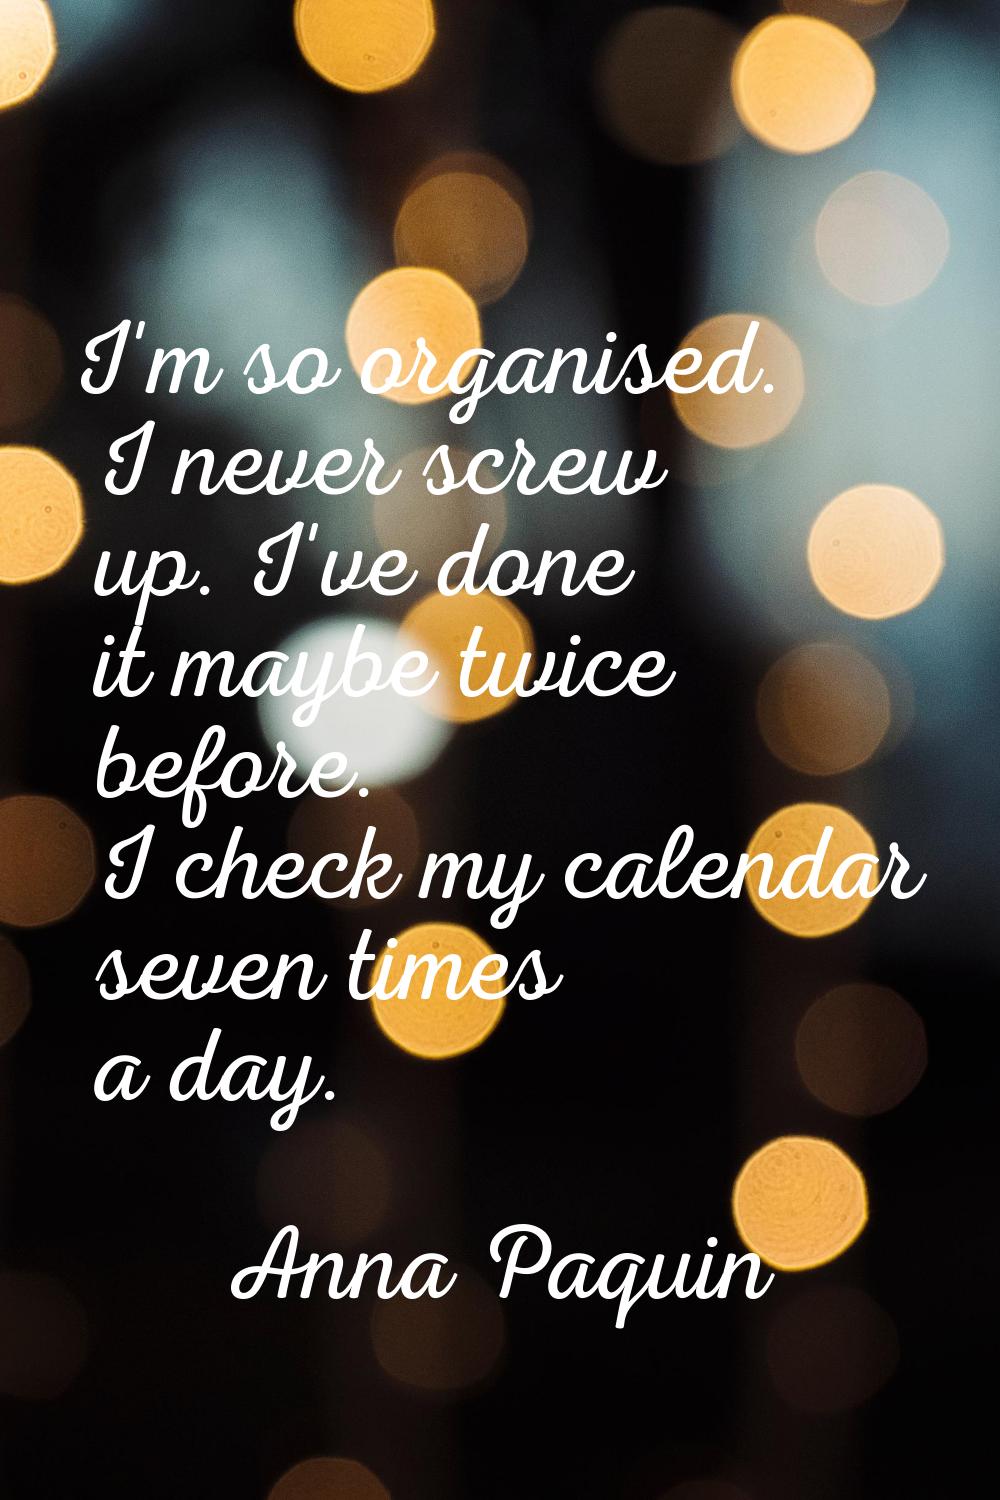 I'm so organised. I never screw up. I've done it maybe twice before. I check my calendar seven time